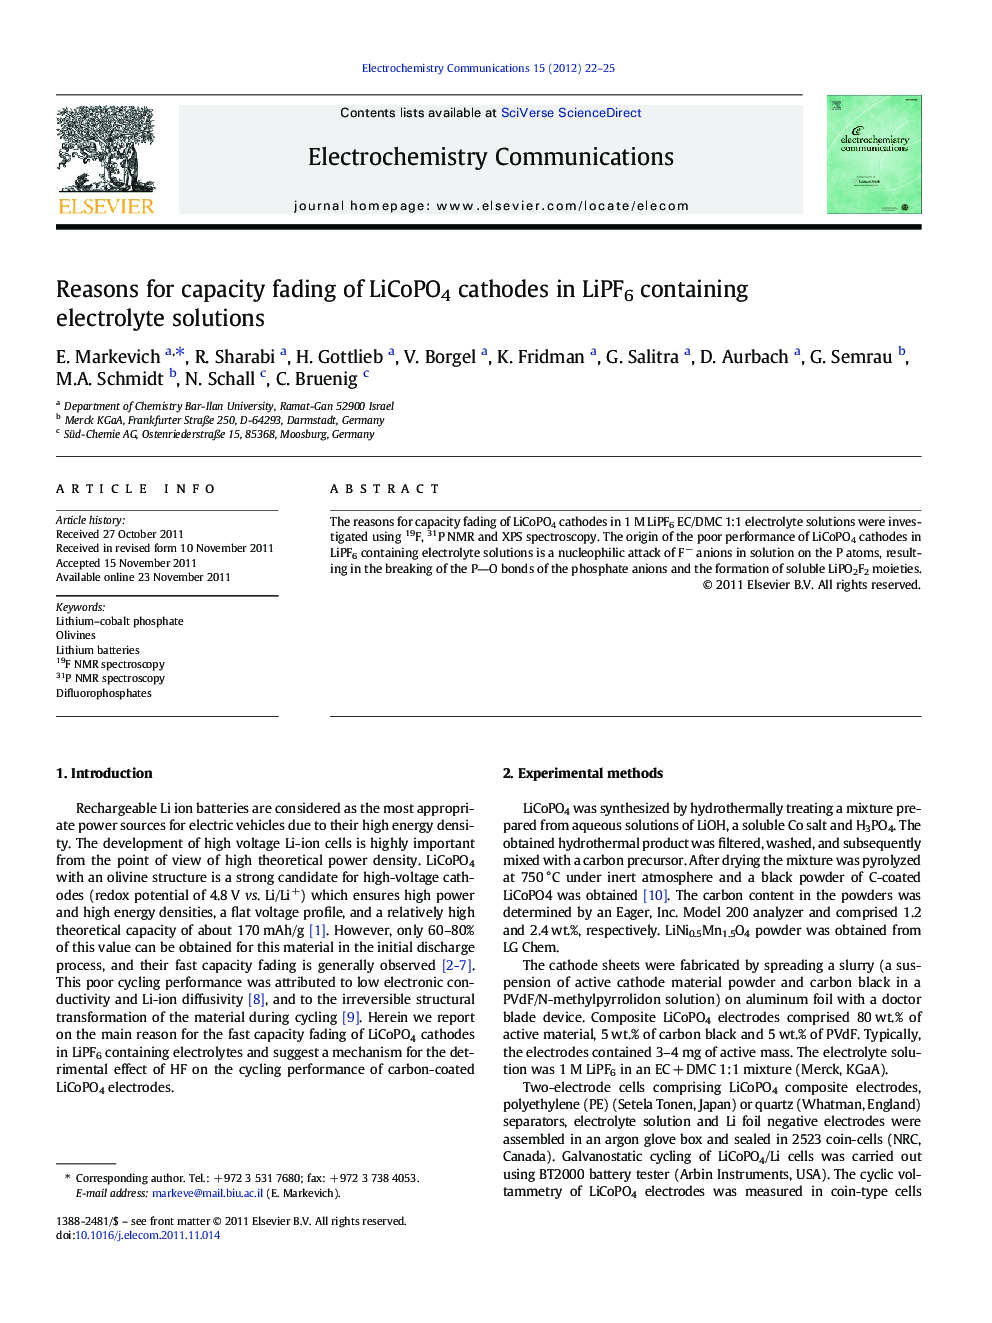 Reasons for capacity fading of LiCoPO4 cathodes in LiPF6 containing electrolyte solutions